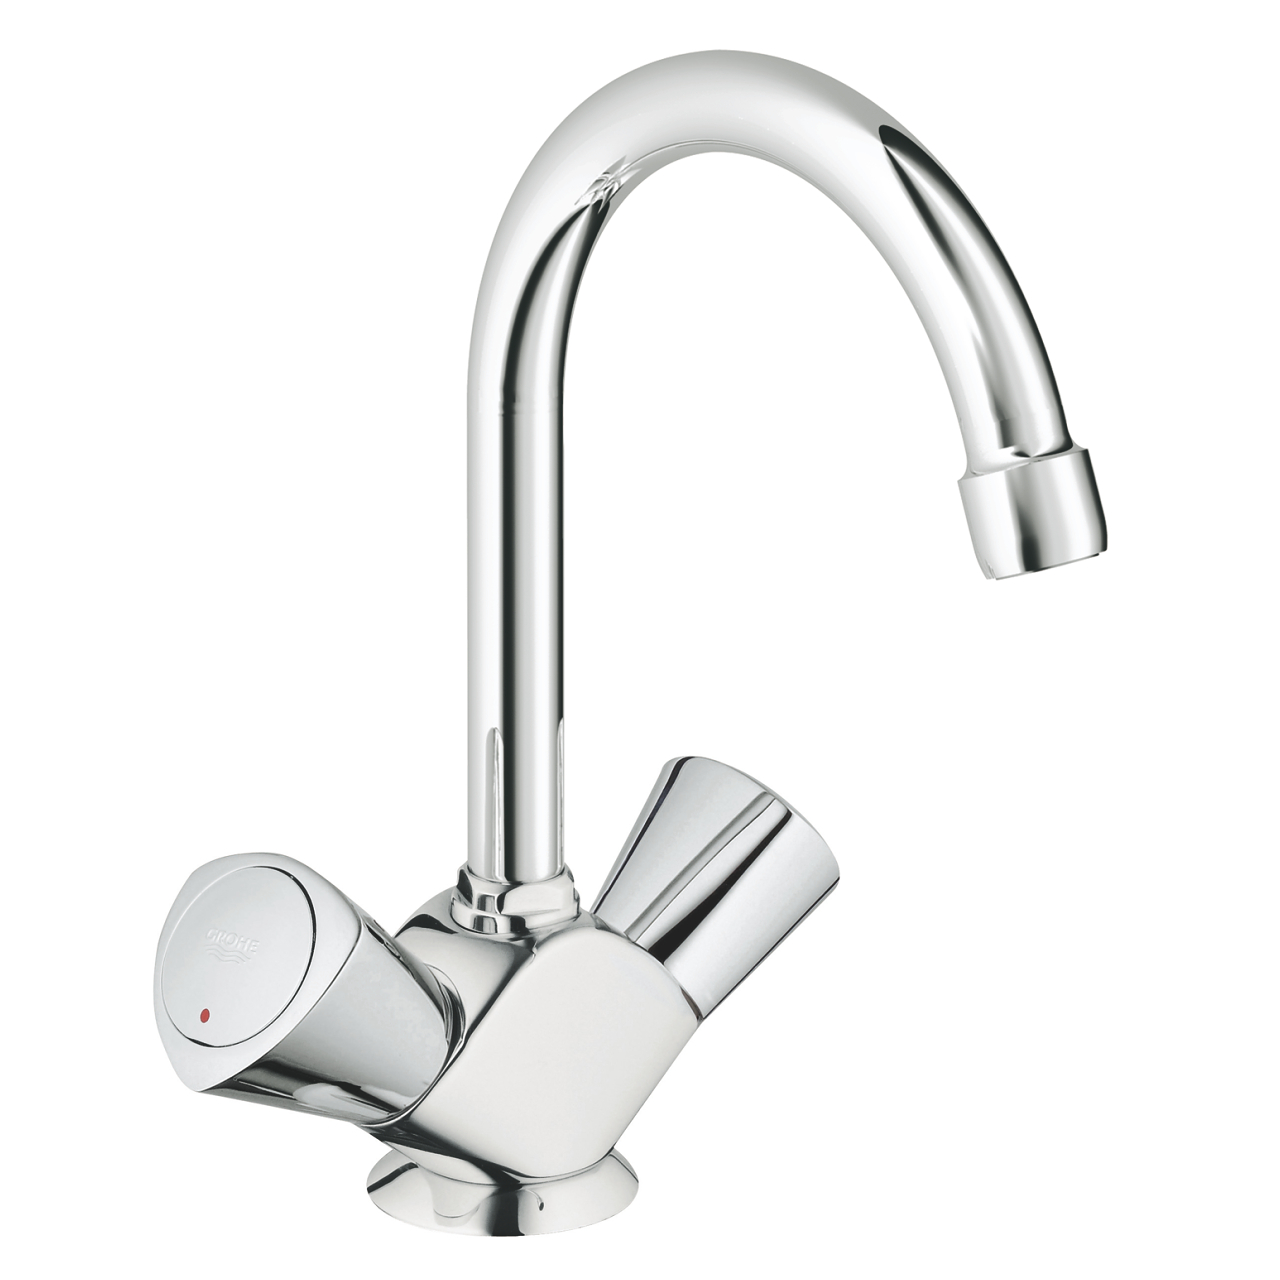 Grohe S- waste - A.J. Loots